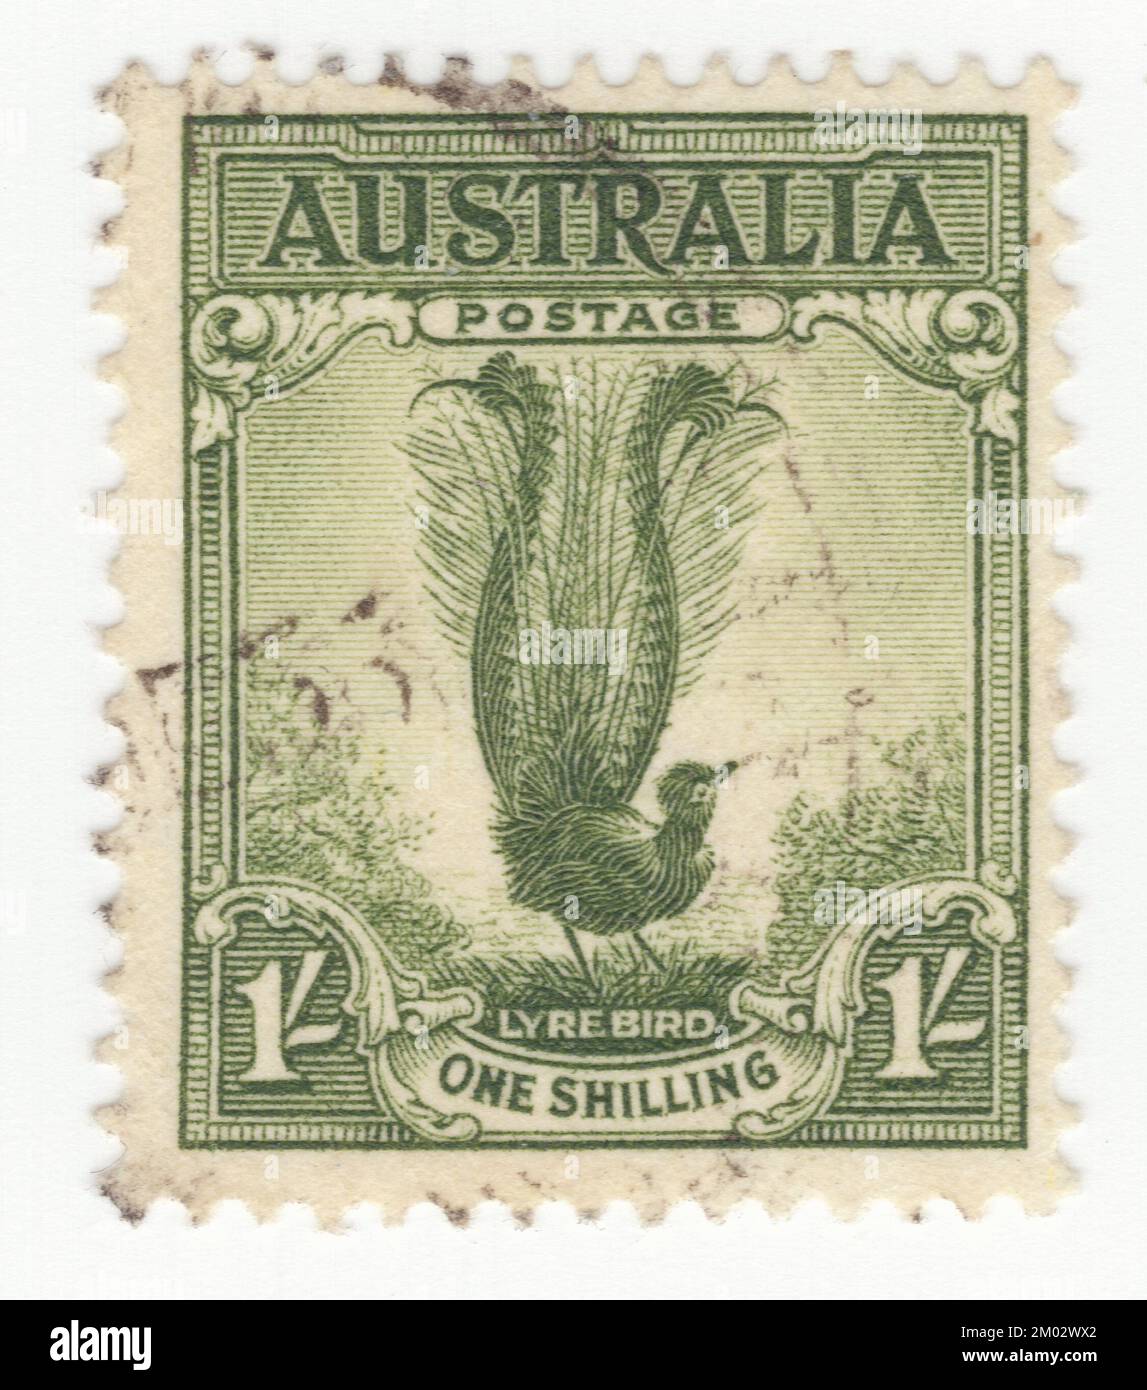 AUSTRALIA — 1932 February 15: An 1 shilling green postage stamp depicting male Lyrebird. The Lyrebird is a recognizable symbol of Australia. A lyrebird is either of two species of ground-dwelling Australian birds that compose the genus Menura, and the family Menuridae. They are most notable for their impressive ability to mimic natural and artificial sounds from their environment, and the striking beauty of the male bird's huge tail when it is fanned out in courtship display. Lyrebirds have unique plumes of neutral-coloured tailfeathers and are among Australia's best-known native birds Stock Photo